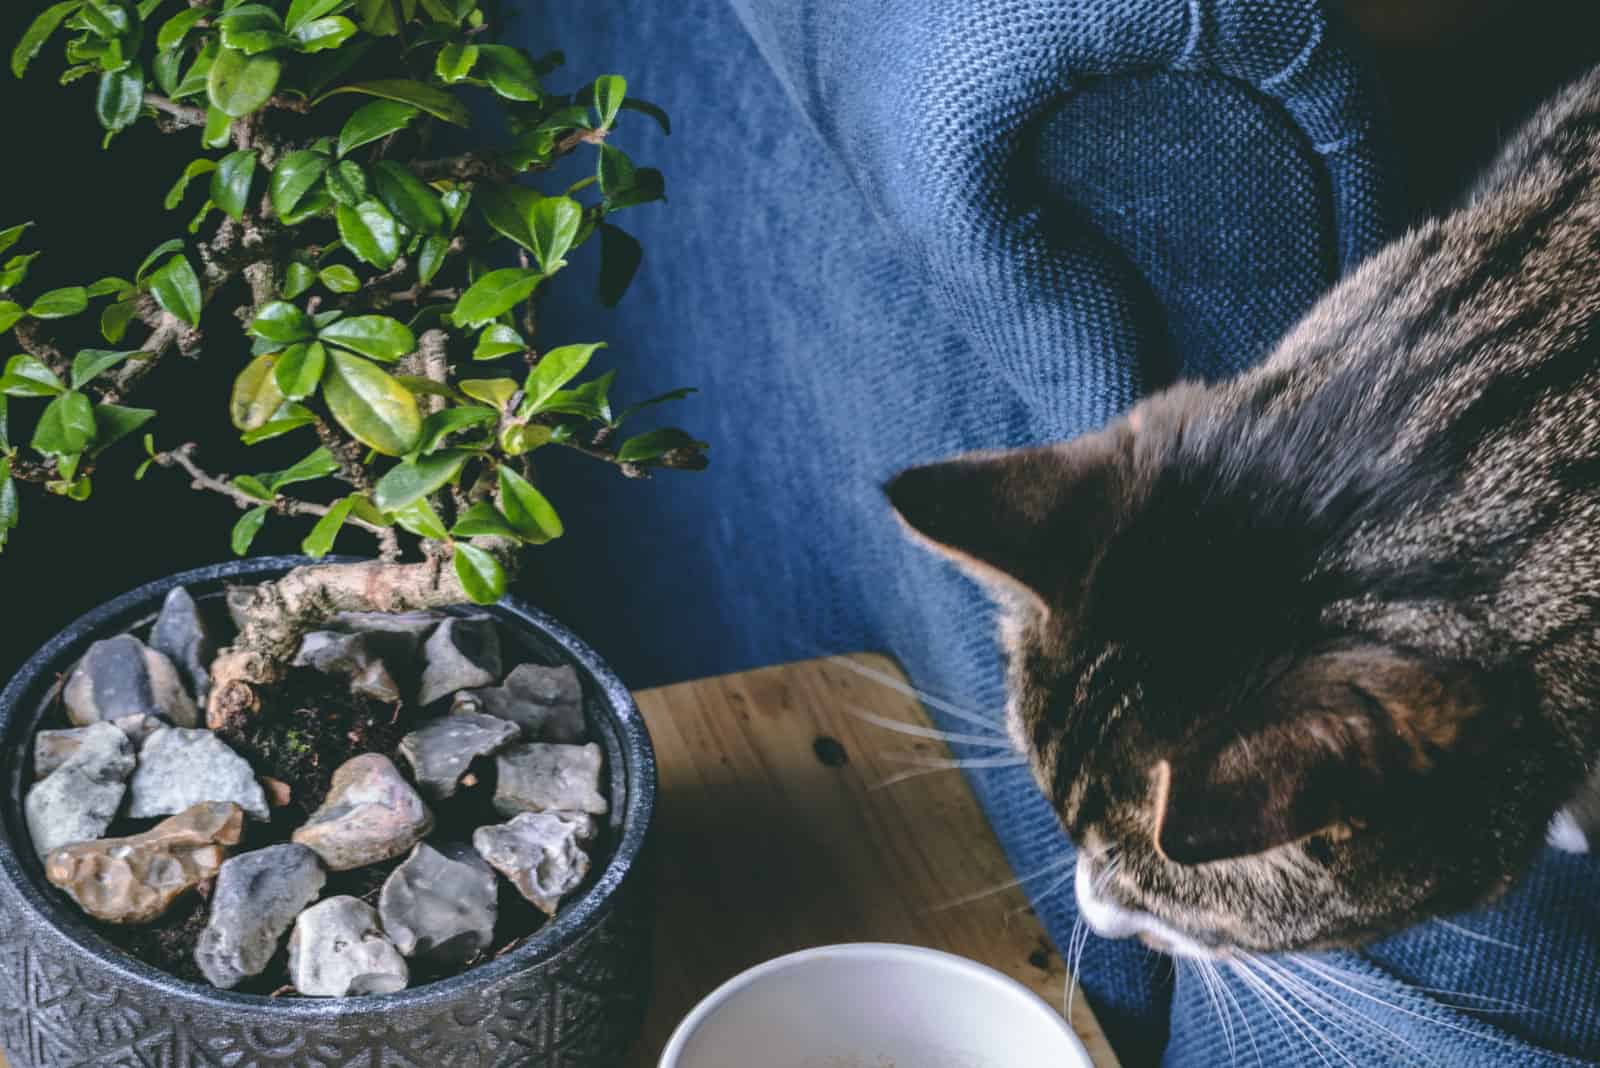 Bonsai, cup and cat